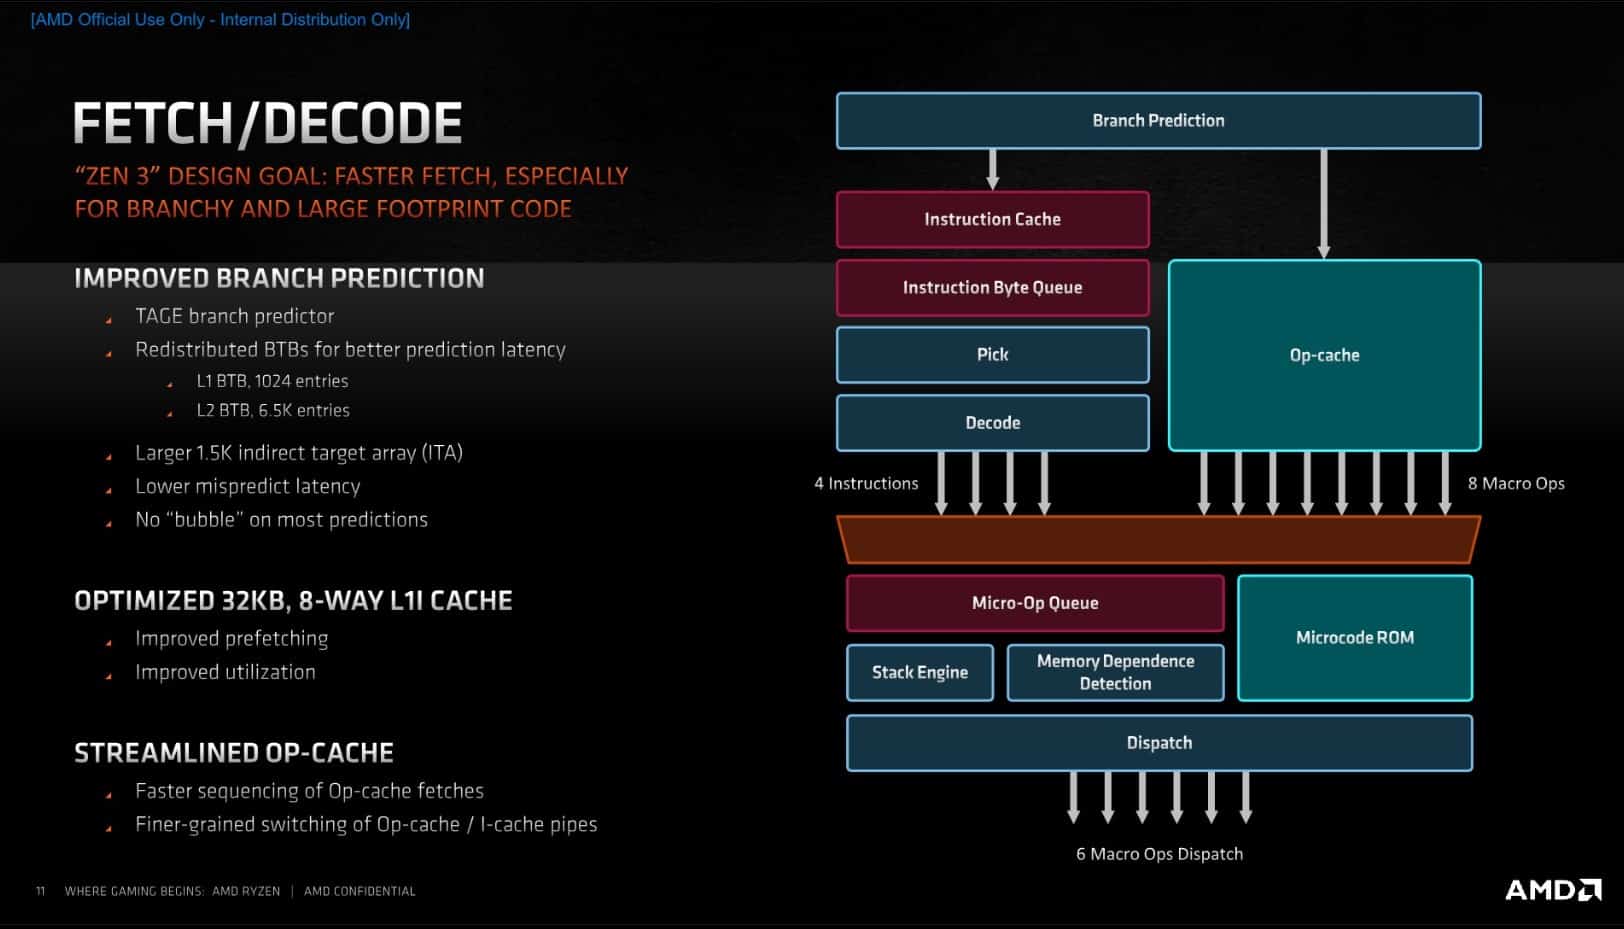 This image describes the key improvements in AMD's Branch Prediction.